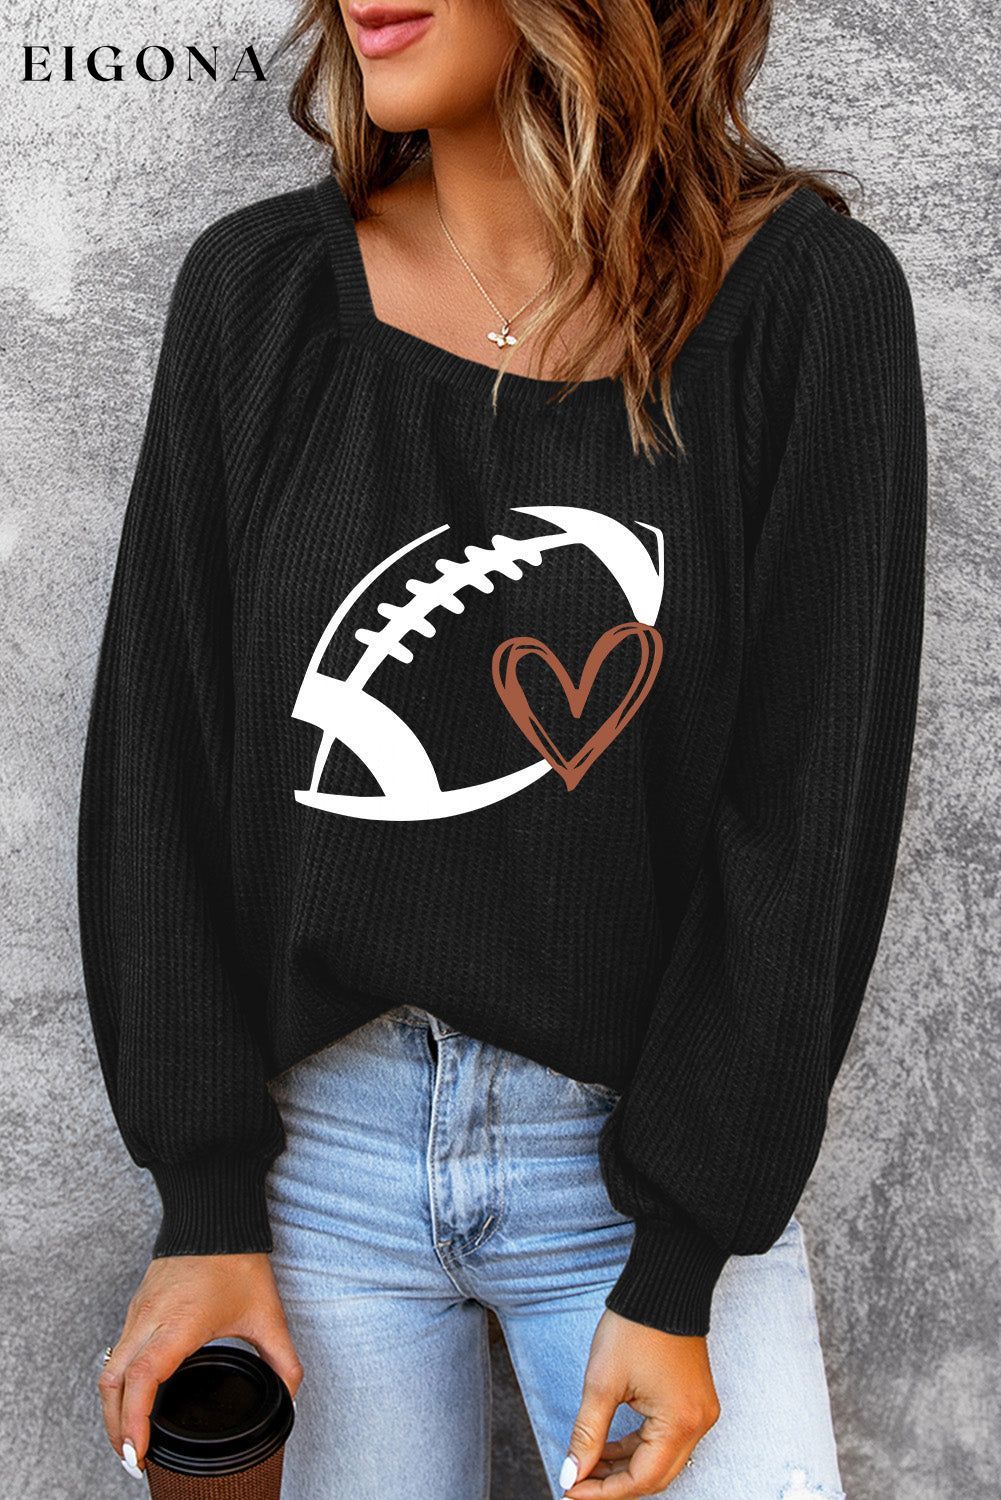 Football Graphic Ribbed Top clothes long sleeve shirt Ship From Overseas shirt sweatshirt SYNZ top trend